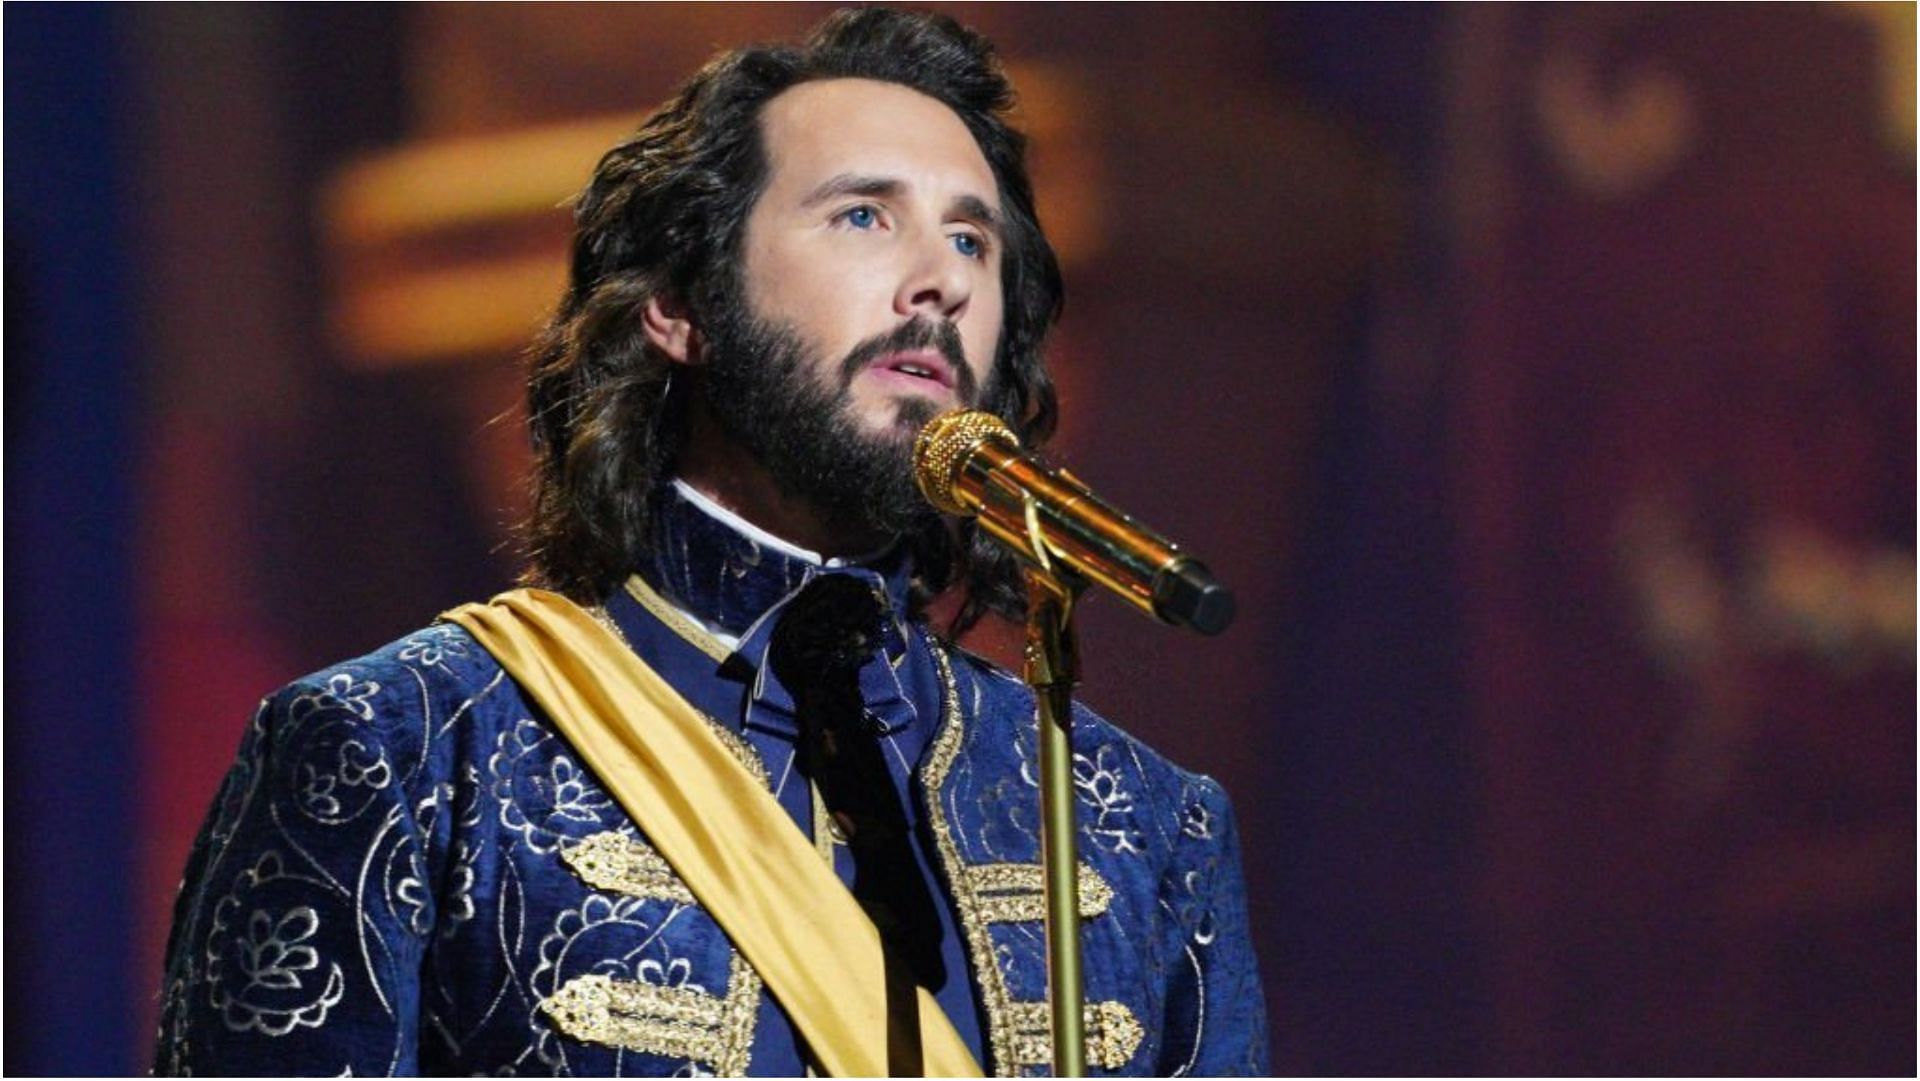 Josh Groban has been romantically linked to some popular faces in the past (Image via Christopher Willard/Getty Images)